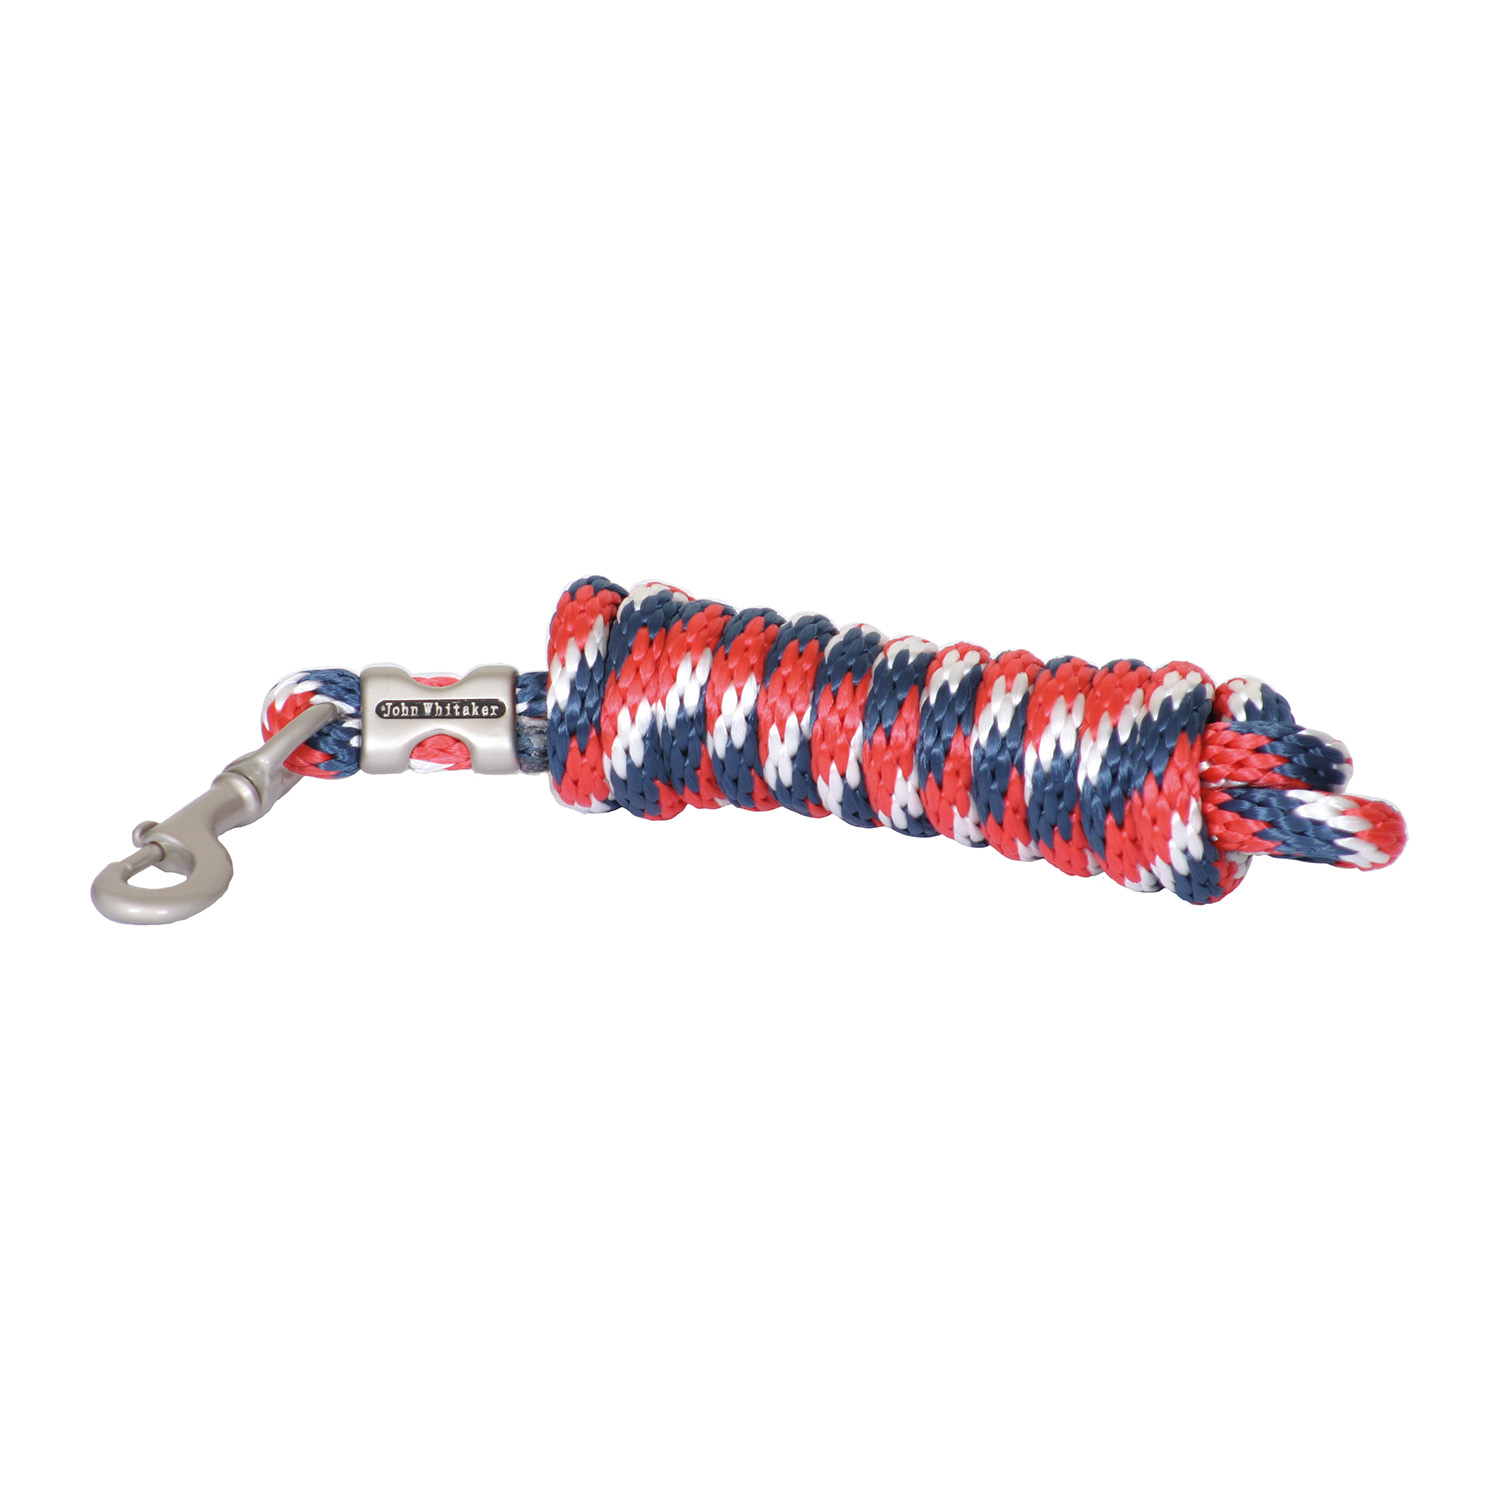 WHITAKER LEAD ROPE MULTI-COLOUR  RED/WHITE/BLUE